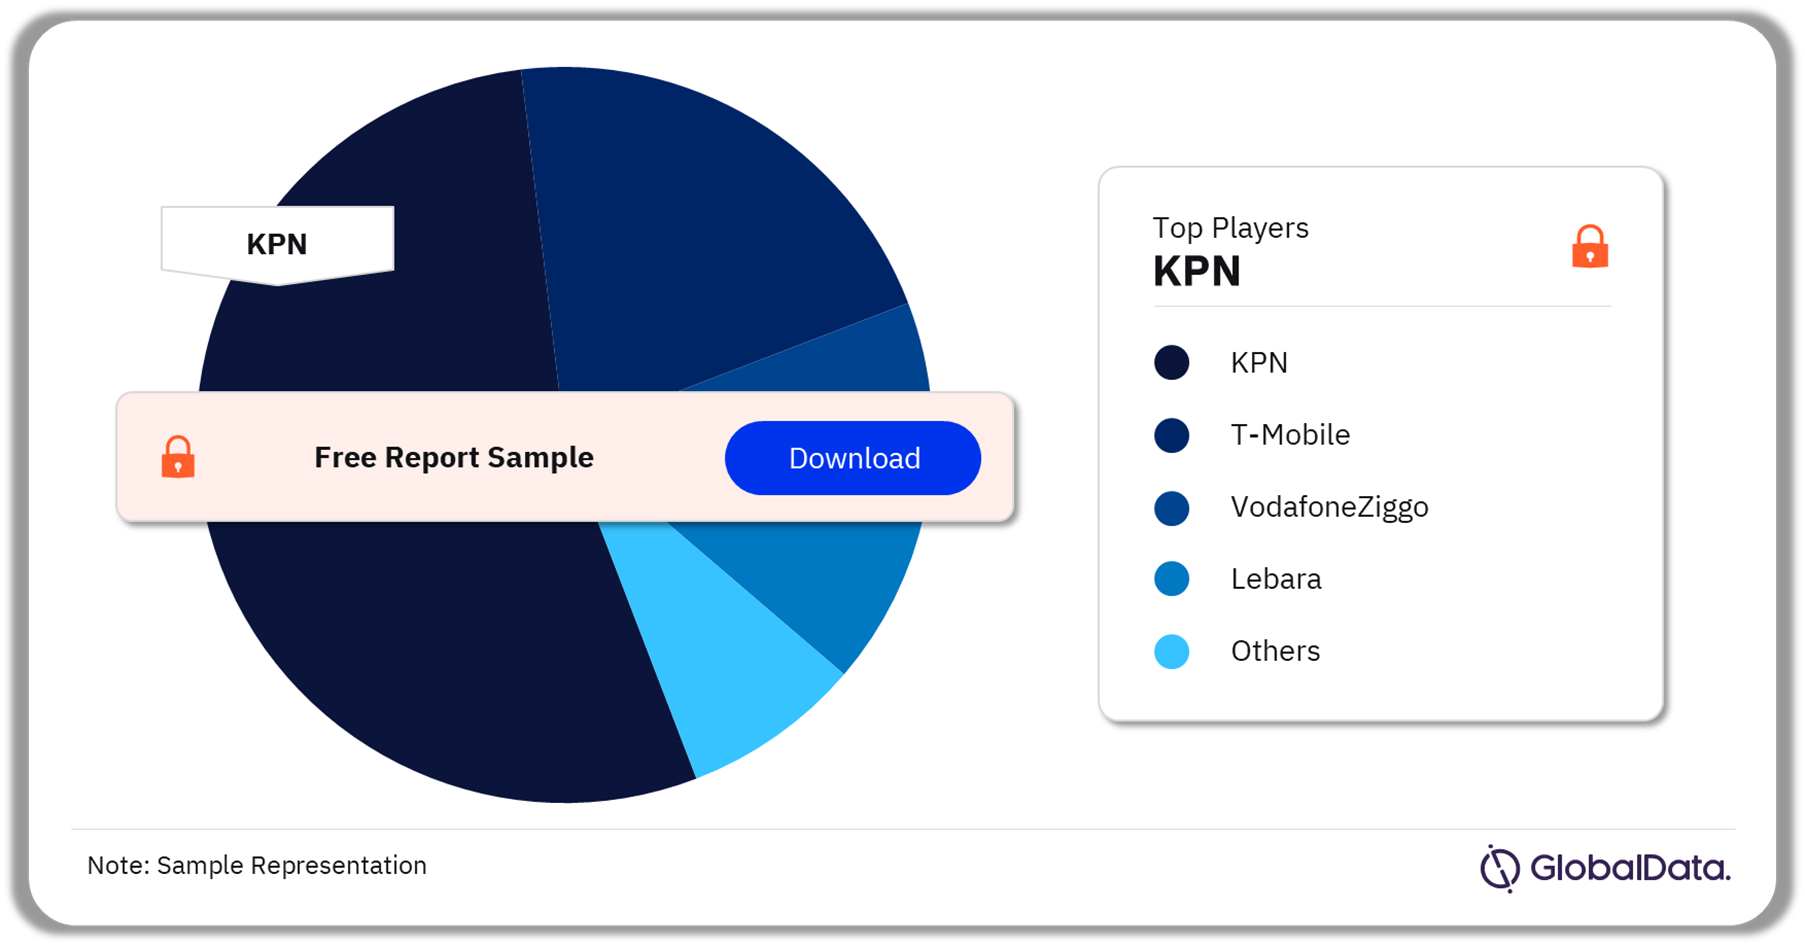 Netherlands Sports Broadcasting Media Mobile Market Analysis by Players, 2022 (%)